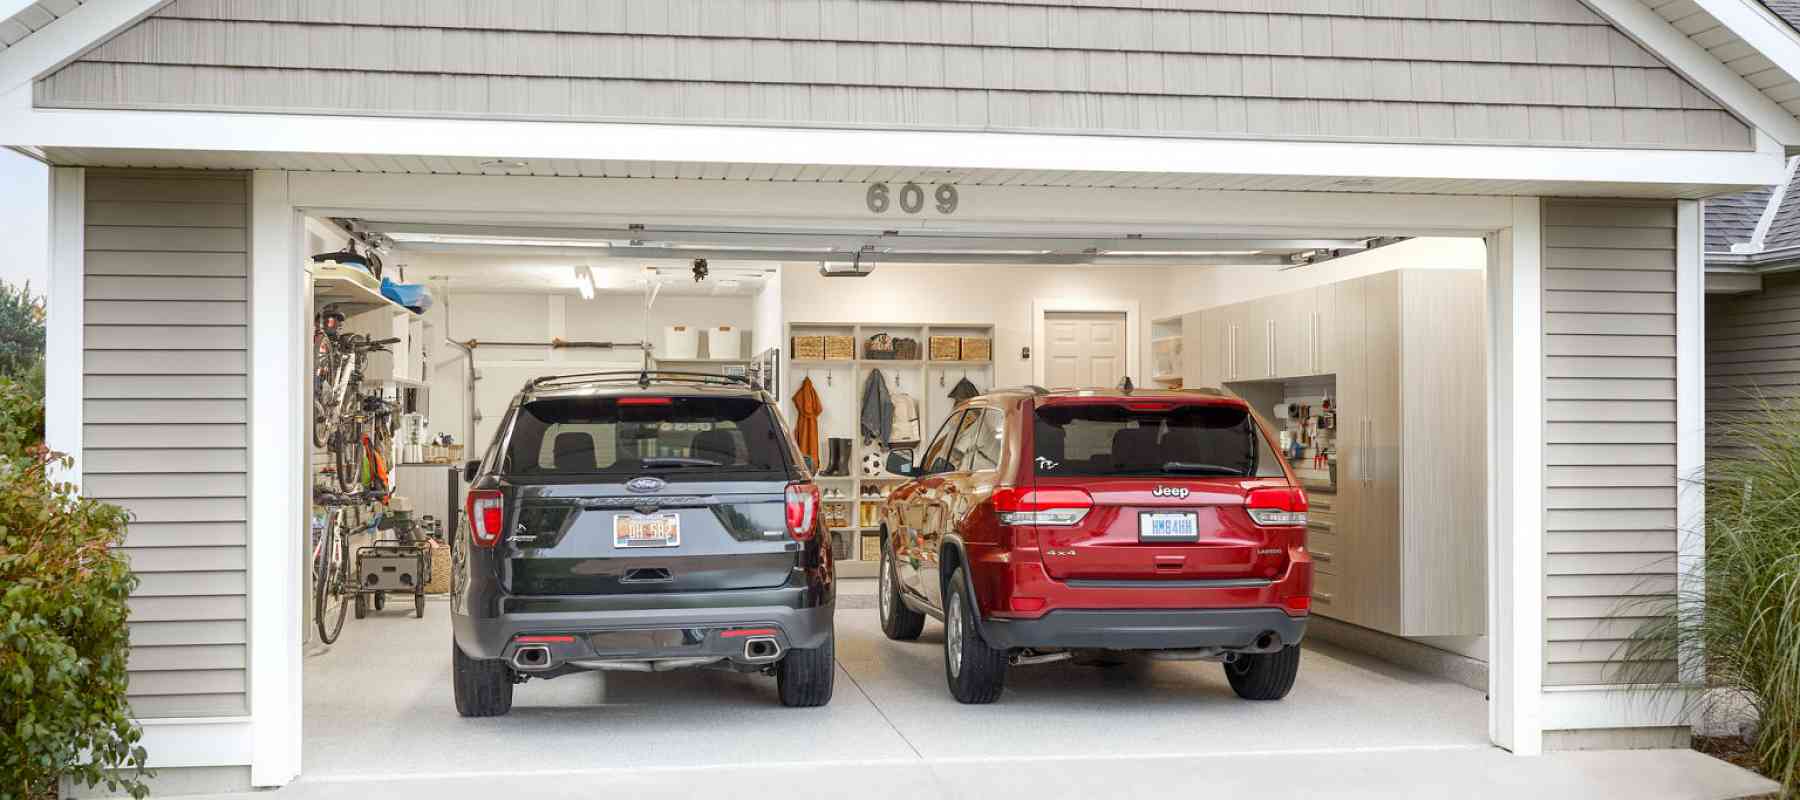 Garage Stats that might surprise you